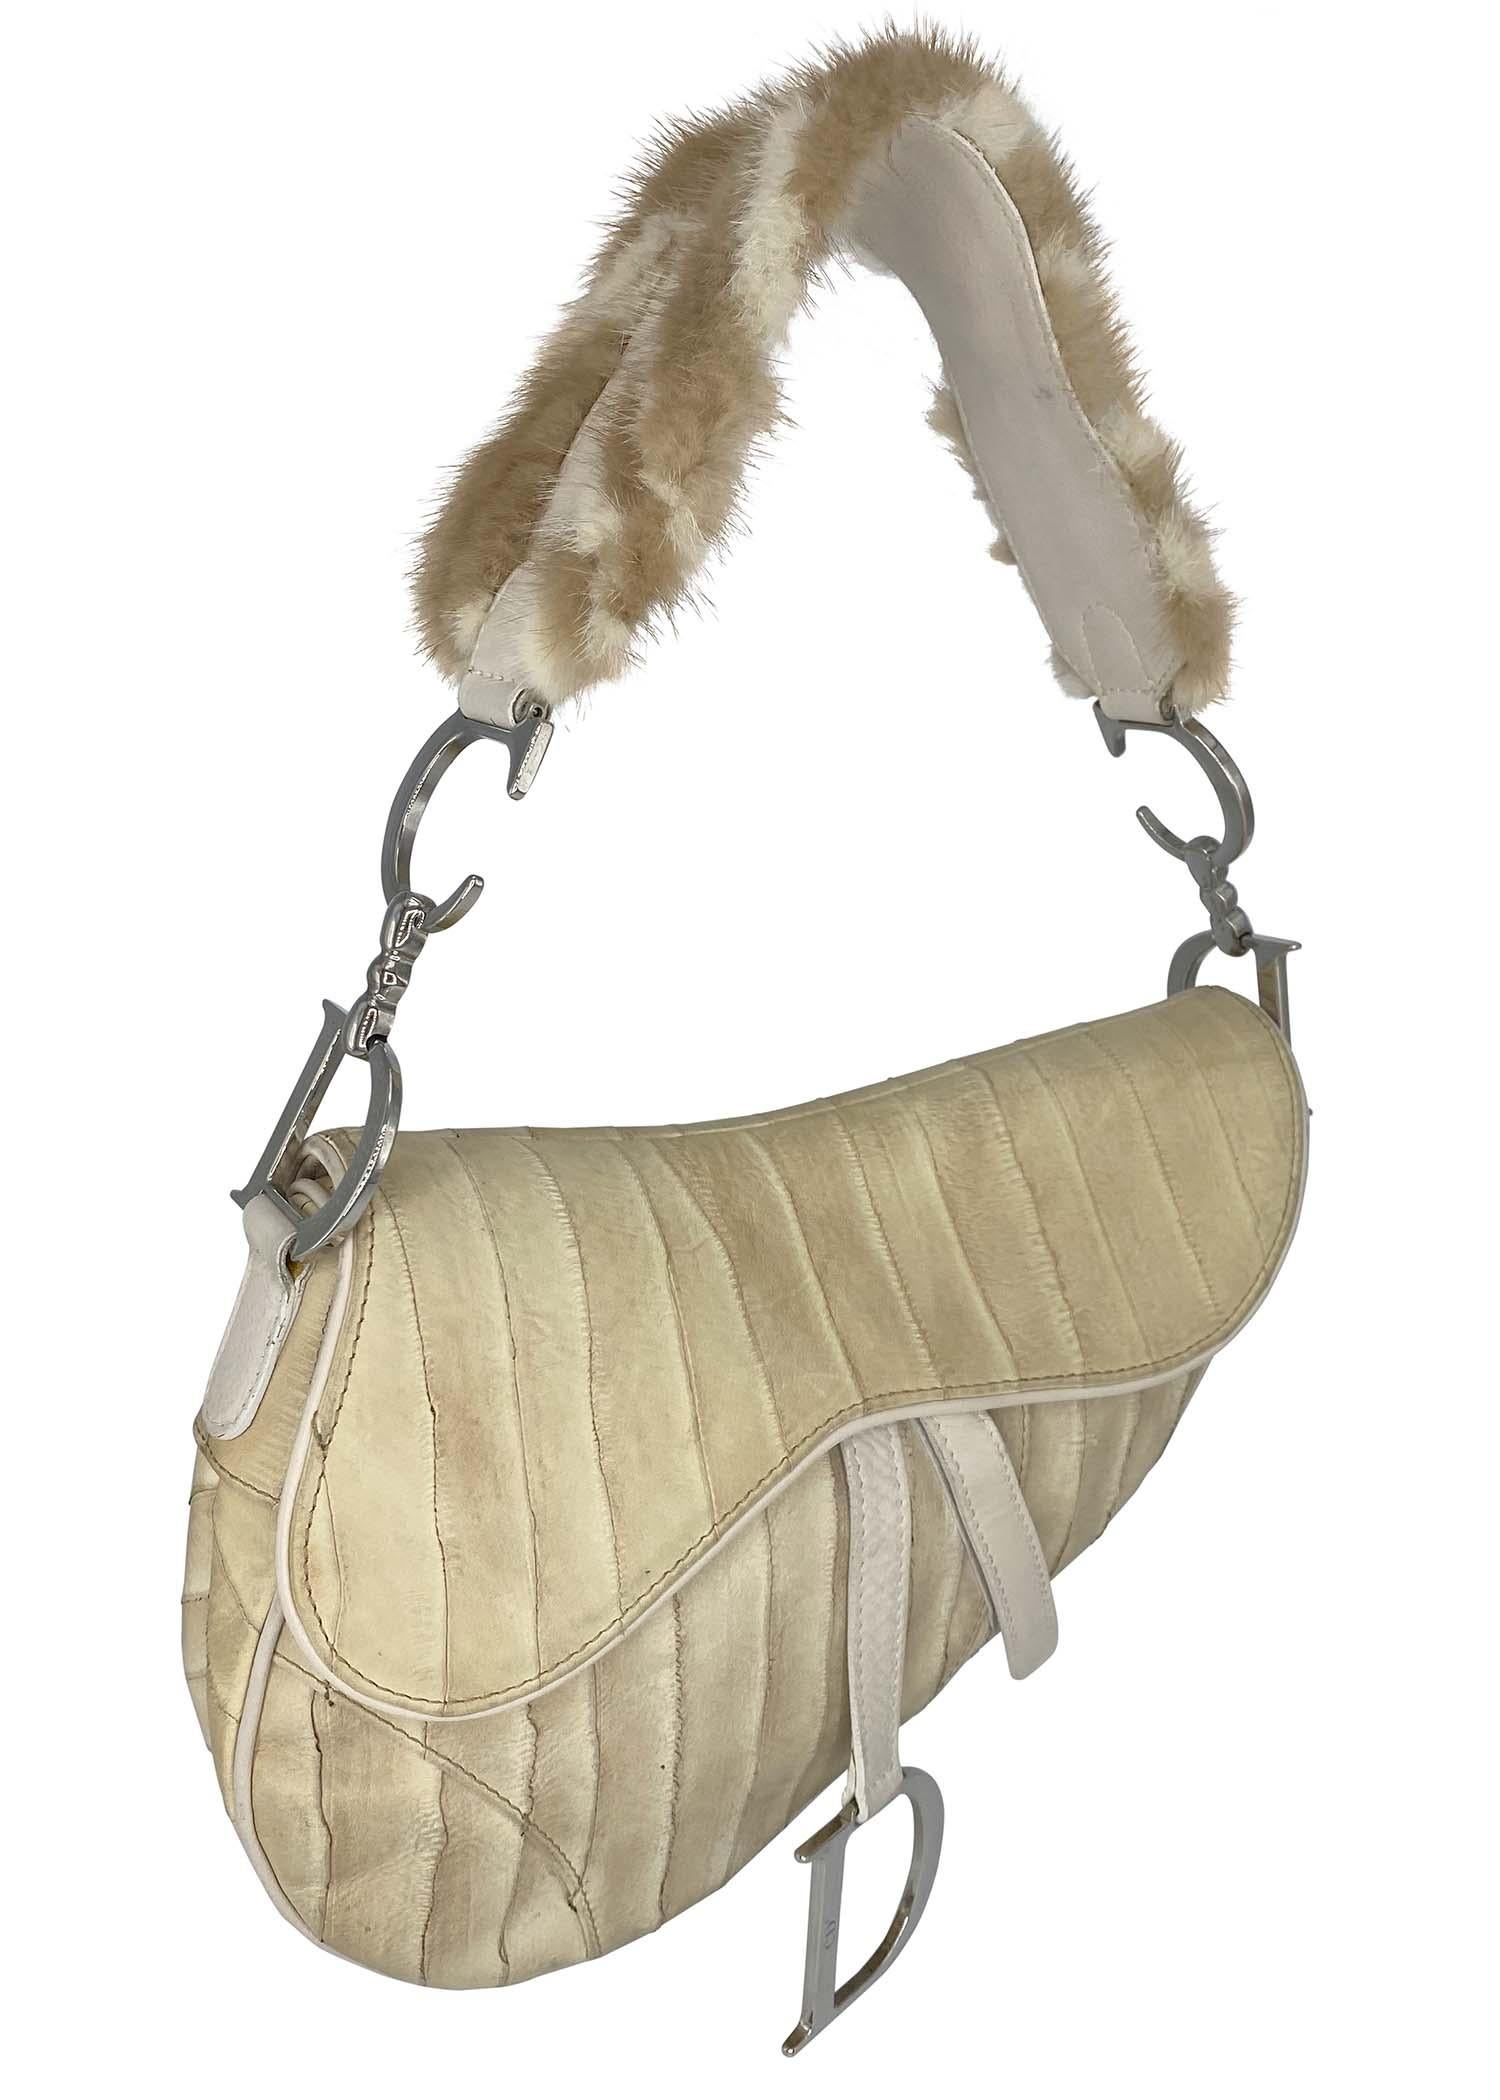 TheRealList presents: a rare, limited edition saddle bag constructed of eel skin, calf skin, and mink fur designed by John Galliano for Christian Dior's Fall/Winter 2004 collection. The saddle bag first debuted in 1999 for Dior's Spring/Summer 2000